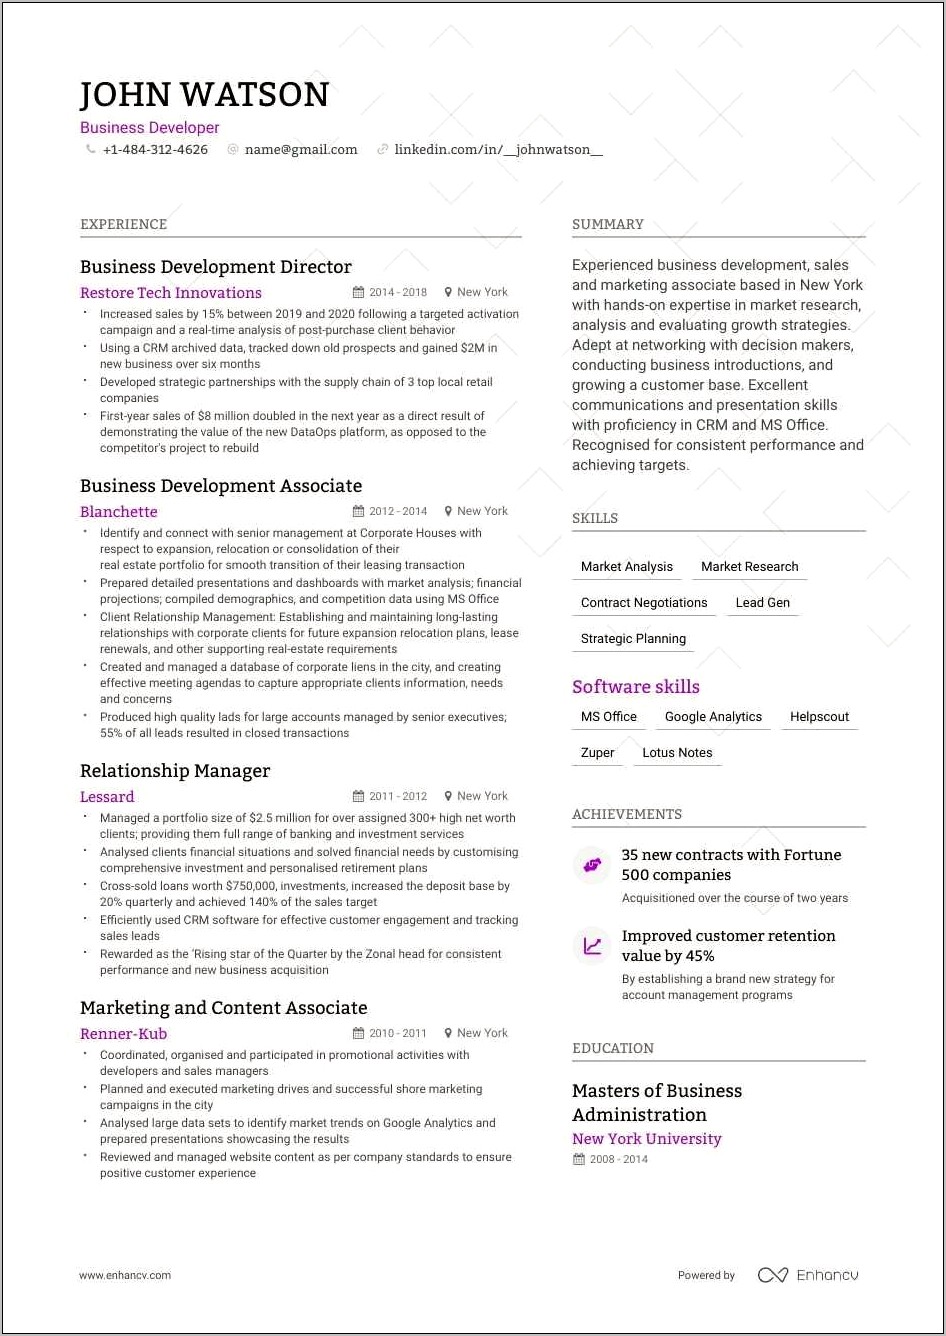 Objective Statement For Customer Relationship Manager Resume